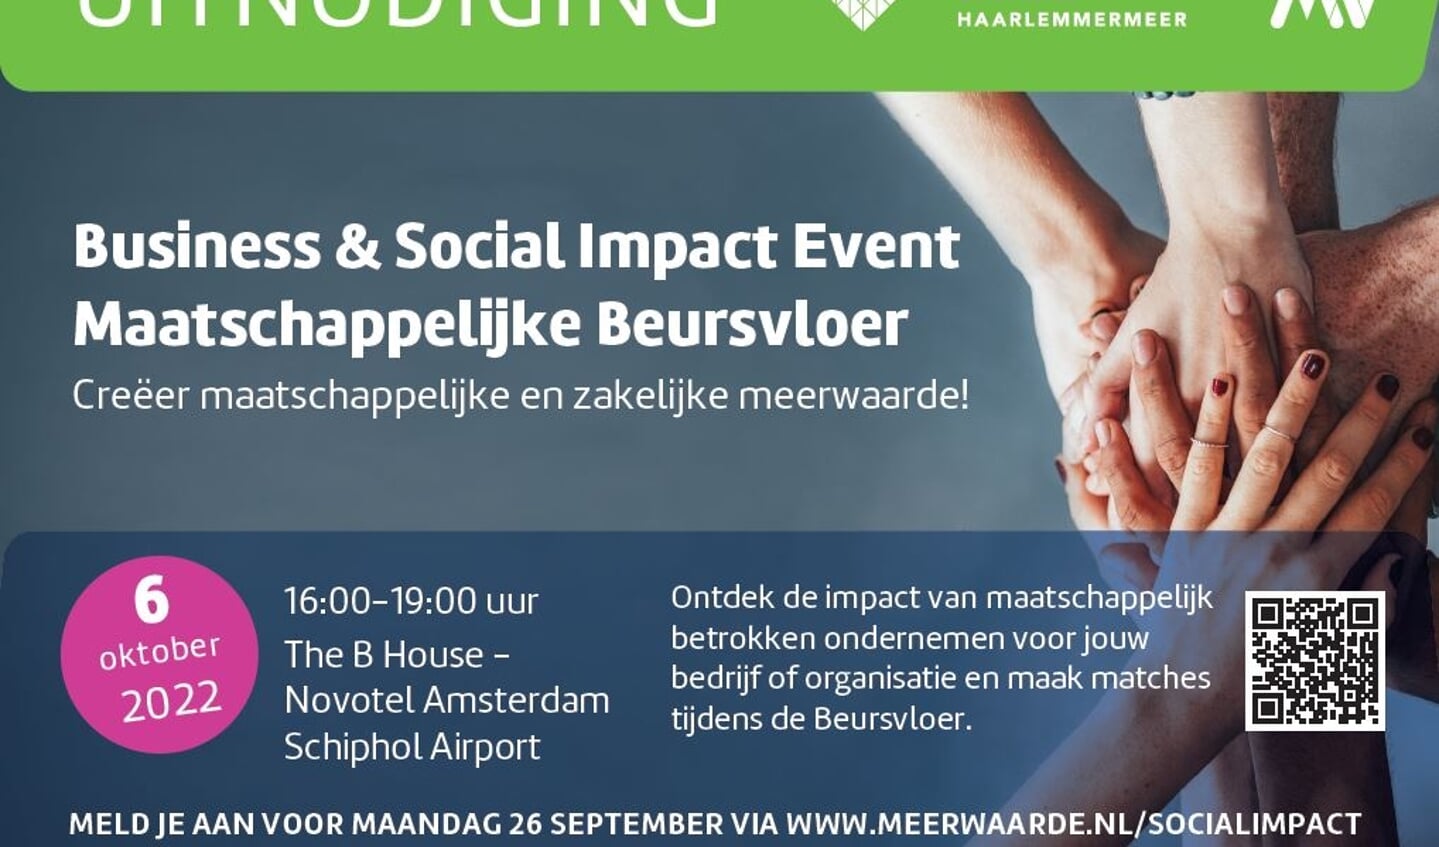 Uitnodiging Business & Social Impact Event 